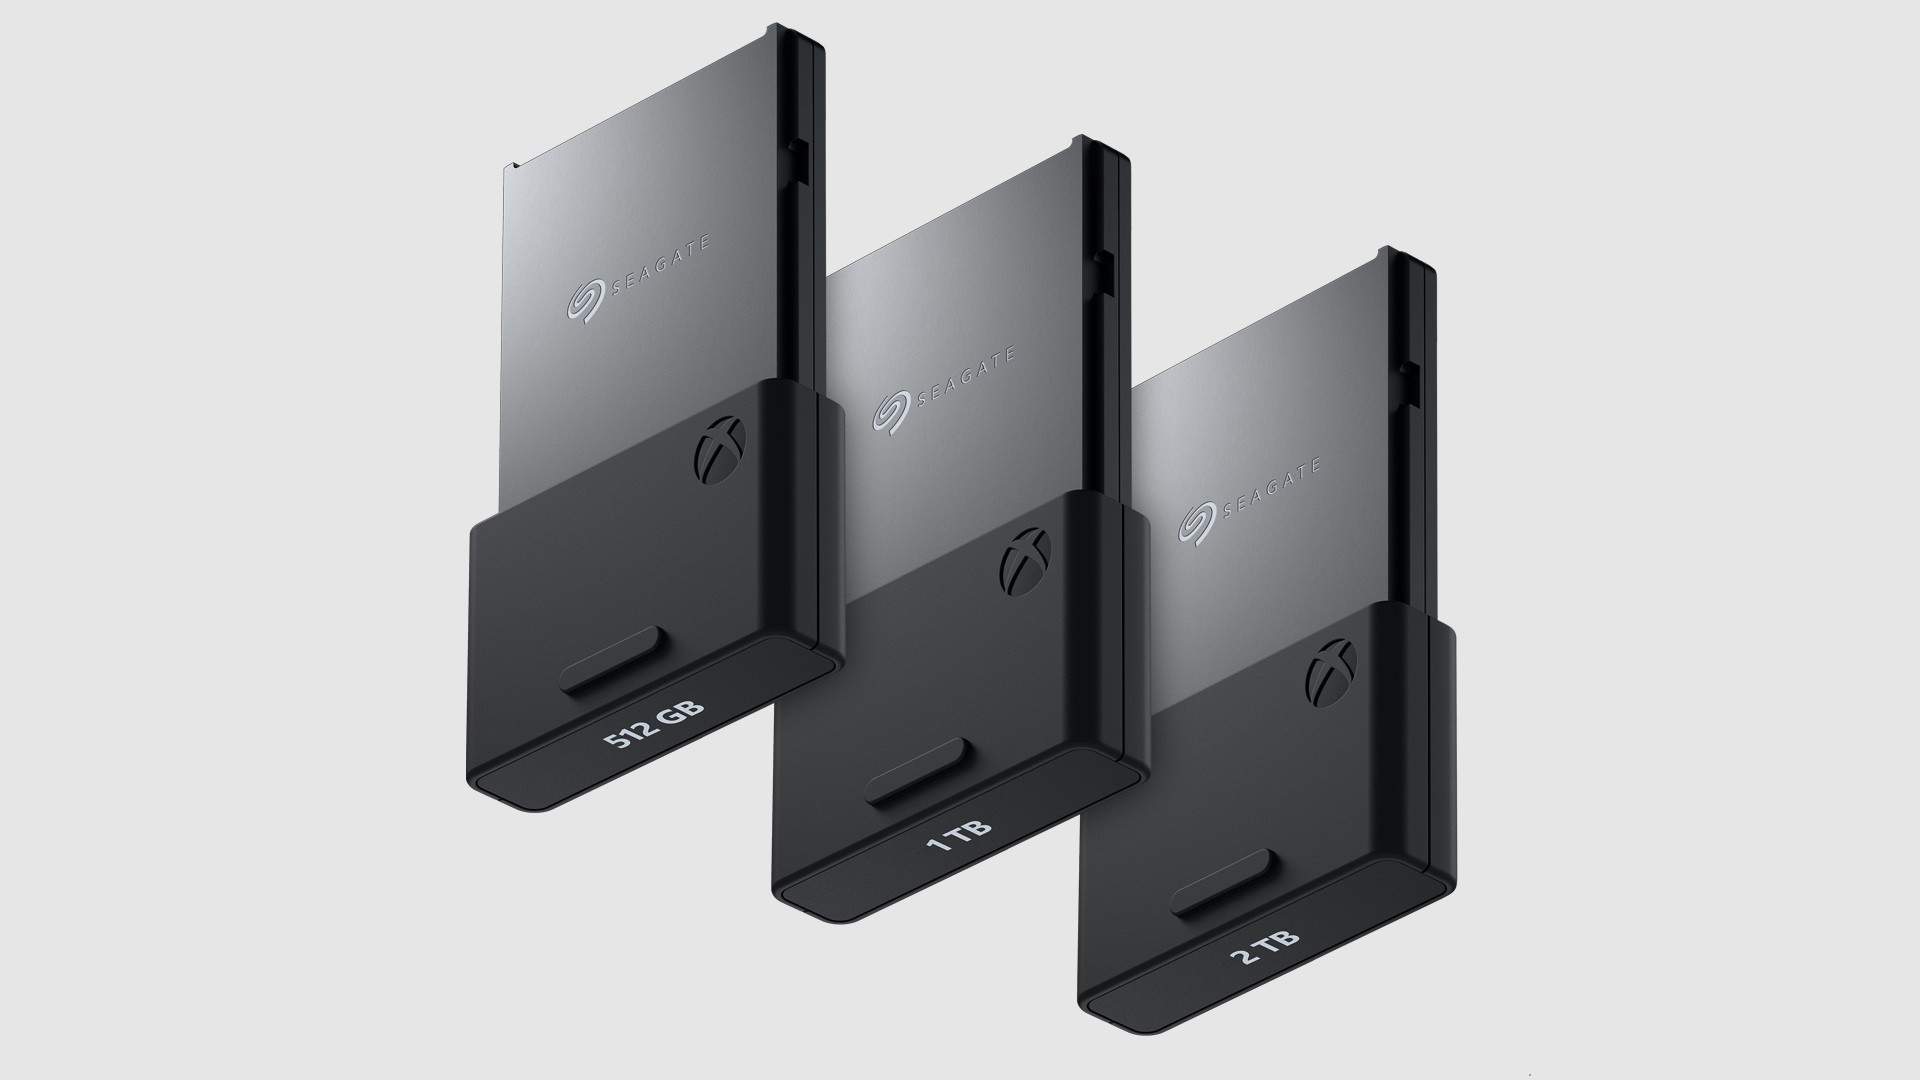 Seagate storage expansion card - 512GB, 1TB, and 2TB models displayed in order of size